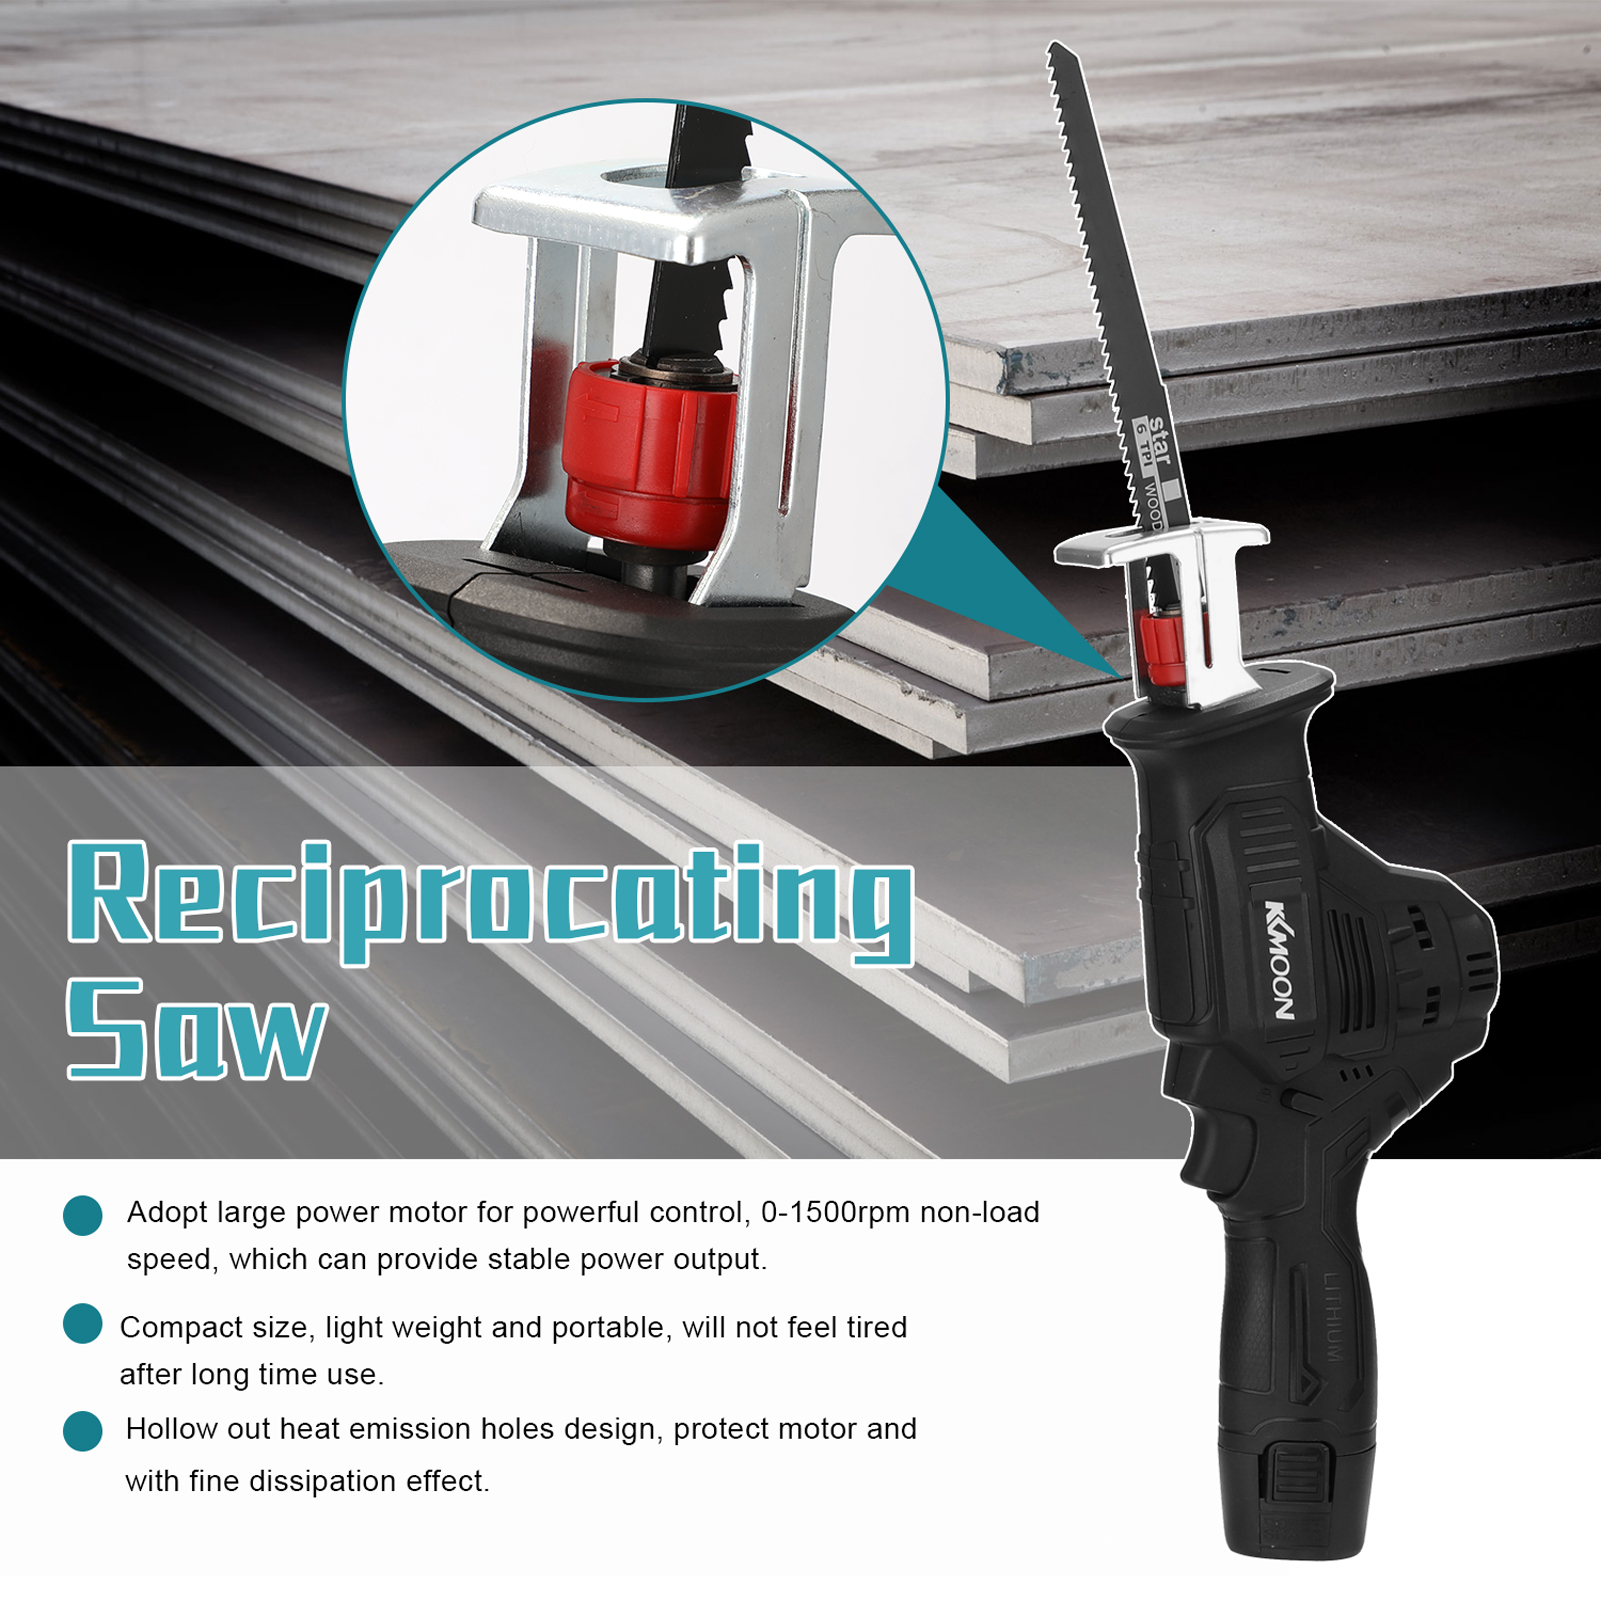 12V Portable Multifunctional Reciprocating Saws Outdoor Saber Saw Electric Power Tools for Cutting Wood Iron Sheet Plastics